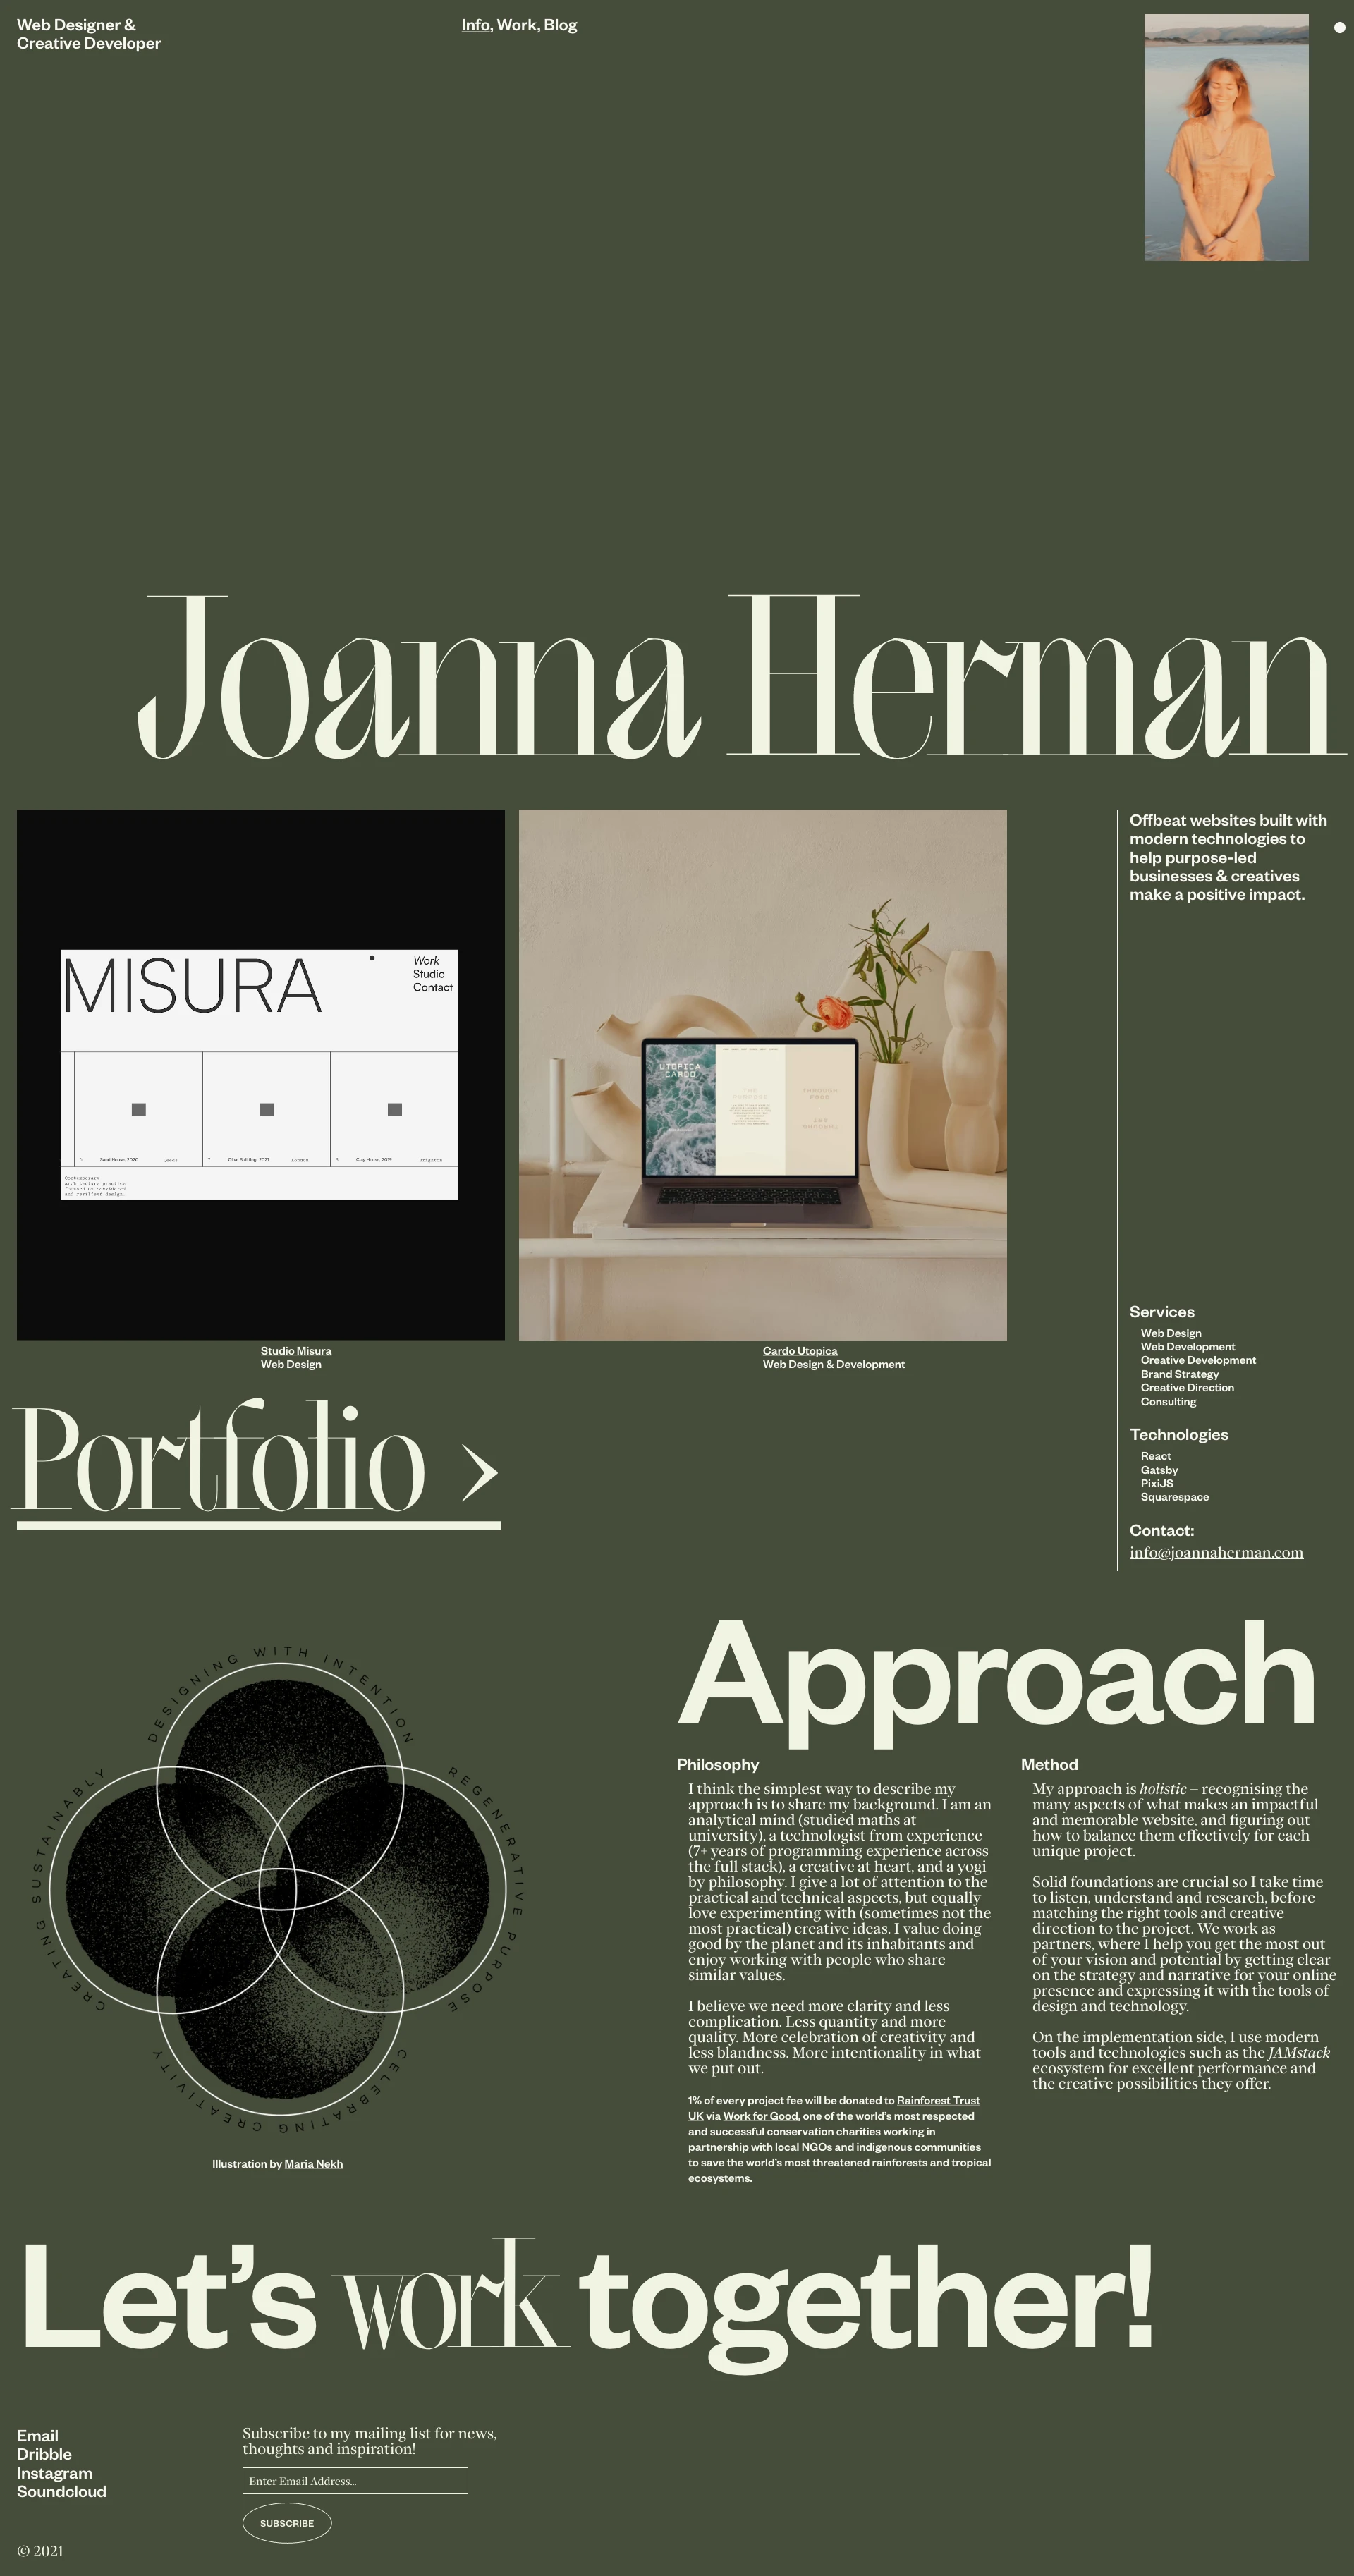 Joanna Herman Landing Page Example: I believe we need more clarity and less complication. Less quantity and more quality. More celebration of creativity and less blandness. More intentionality in what we put out.